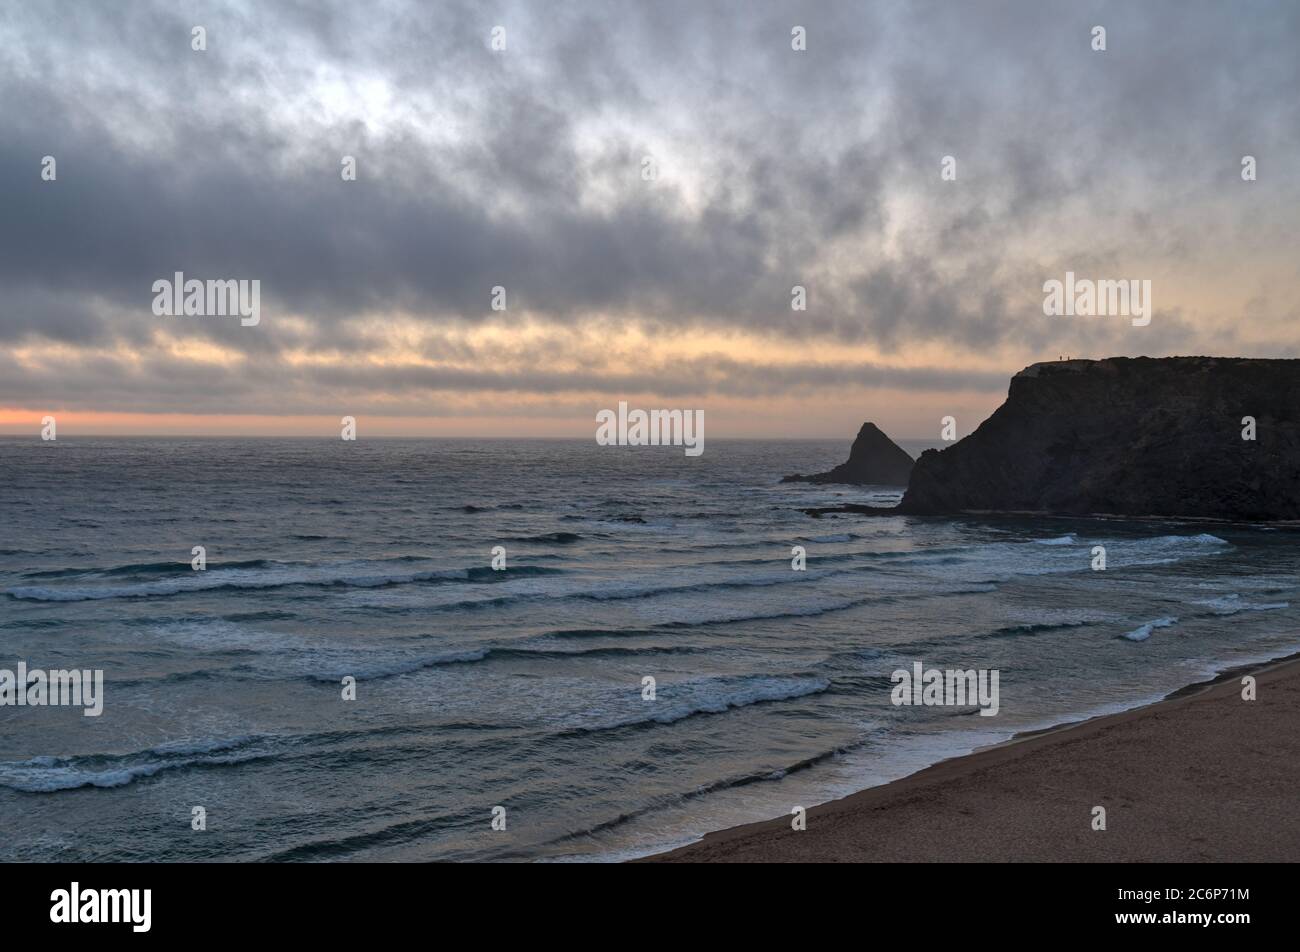 Odeceixe beach after sunset in Costa Vicentina. Algarve, Portugal Stock Photo